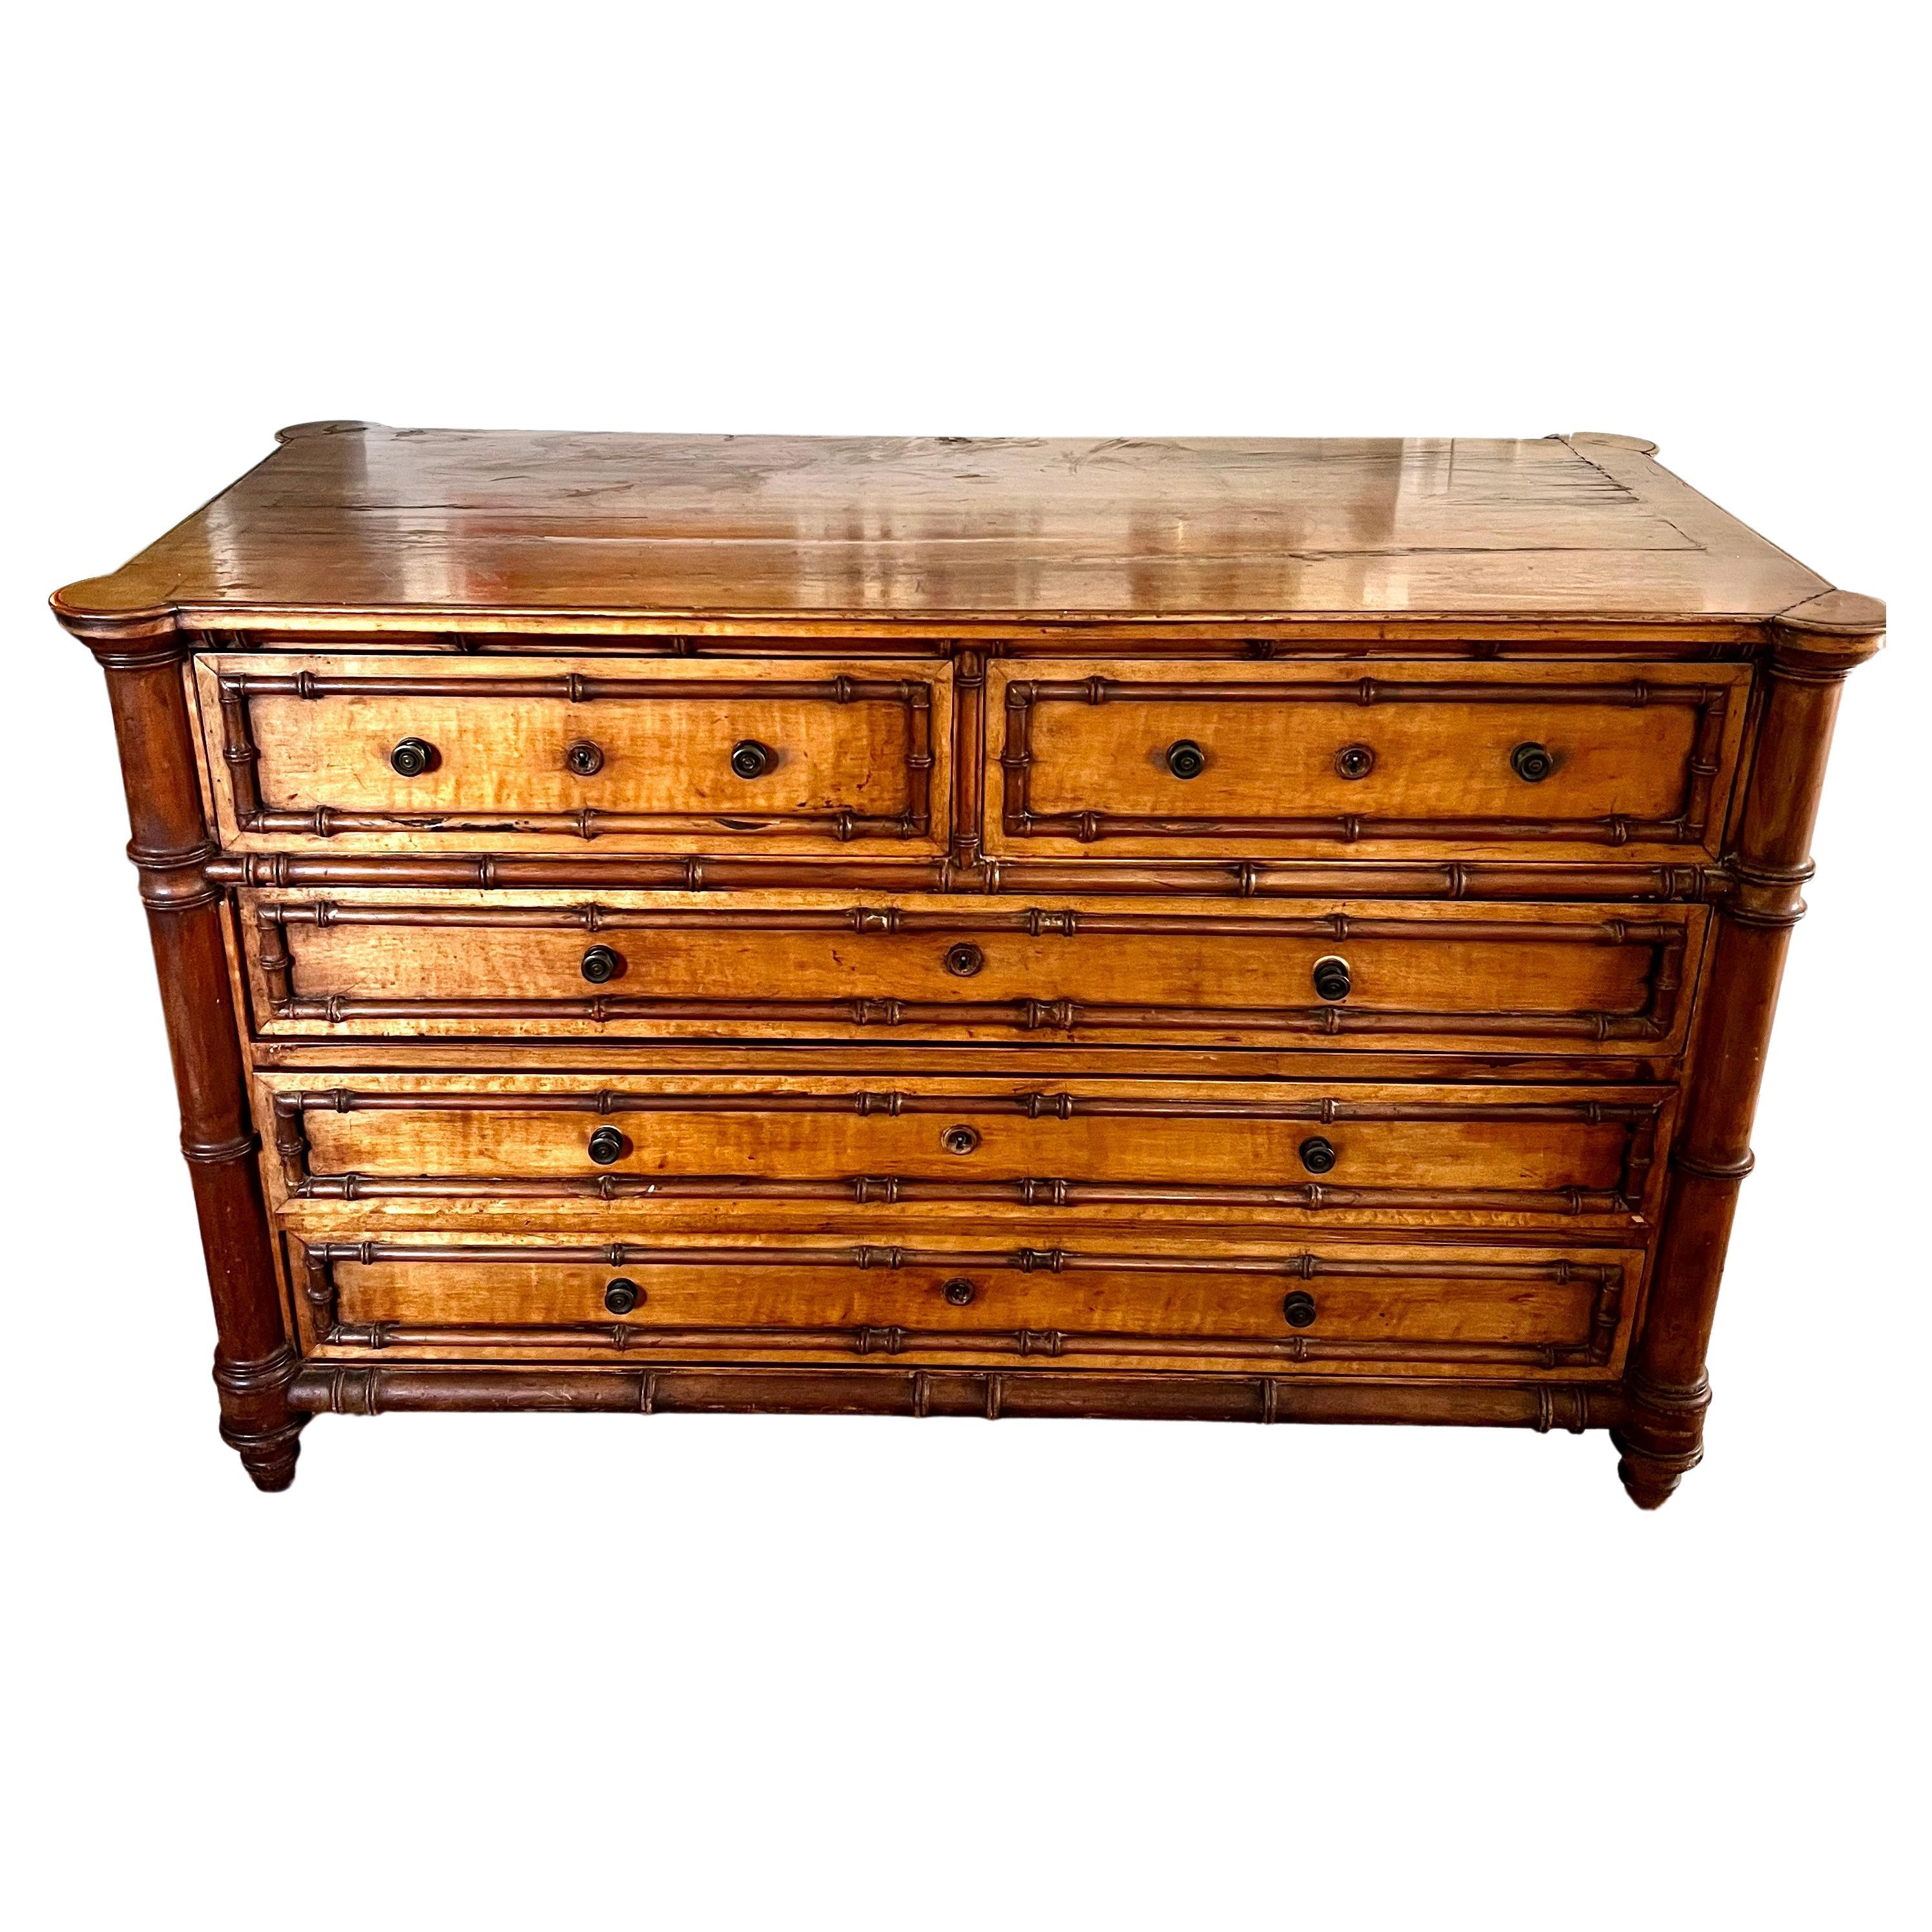 A wonderful dresser with 5 drawers, two smaller on the top and three longer ones below. The original key accompanies the piece and works for all of the drawers. 

The color of the wood is wonderful and all of the faux bamboo is in tact and has a